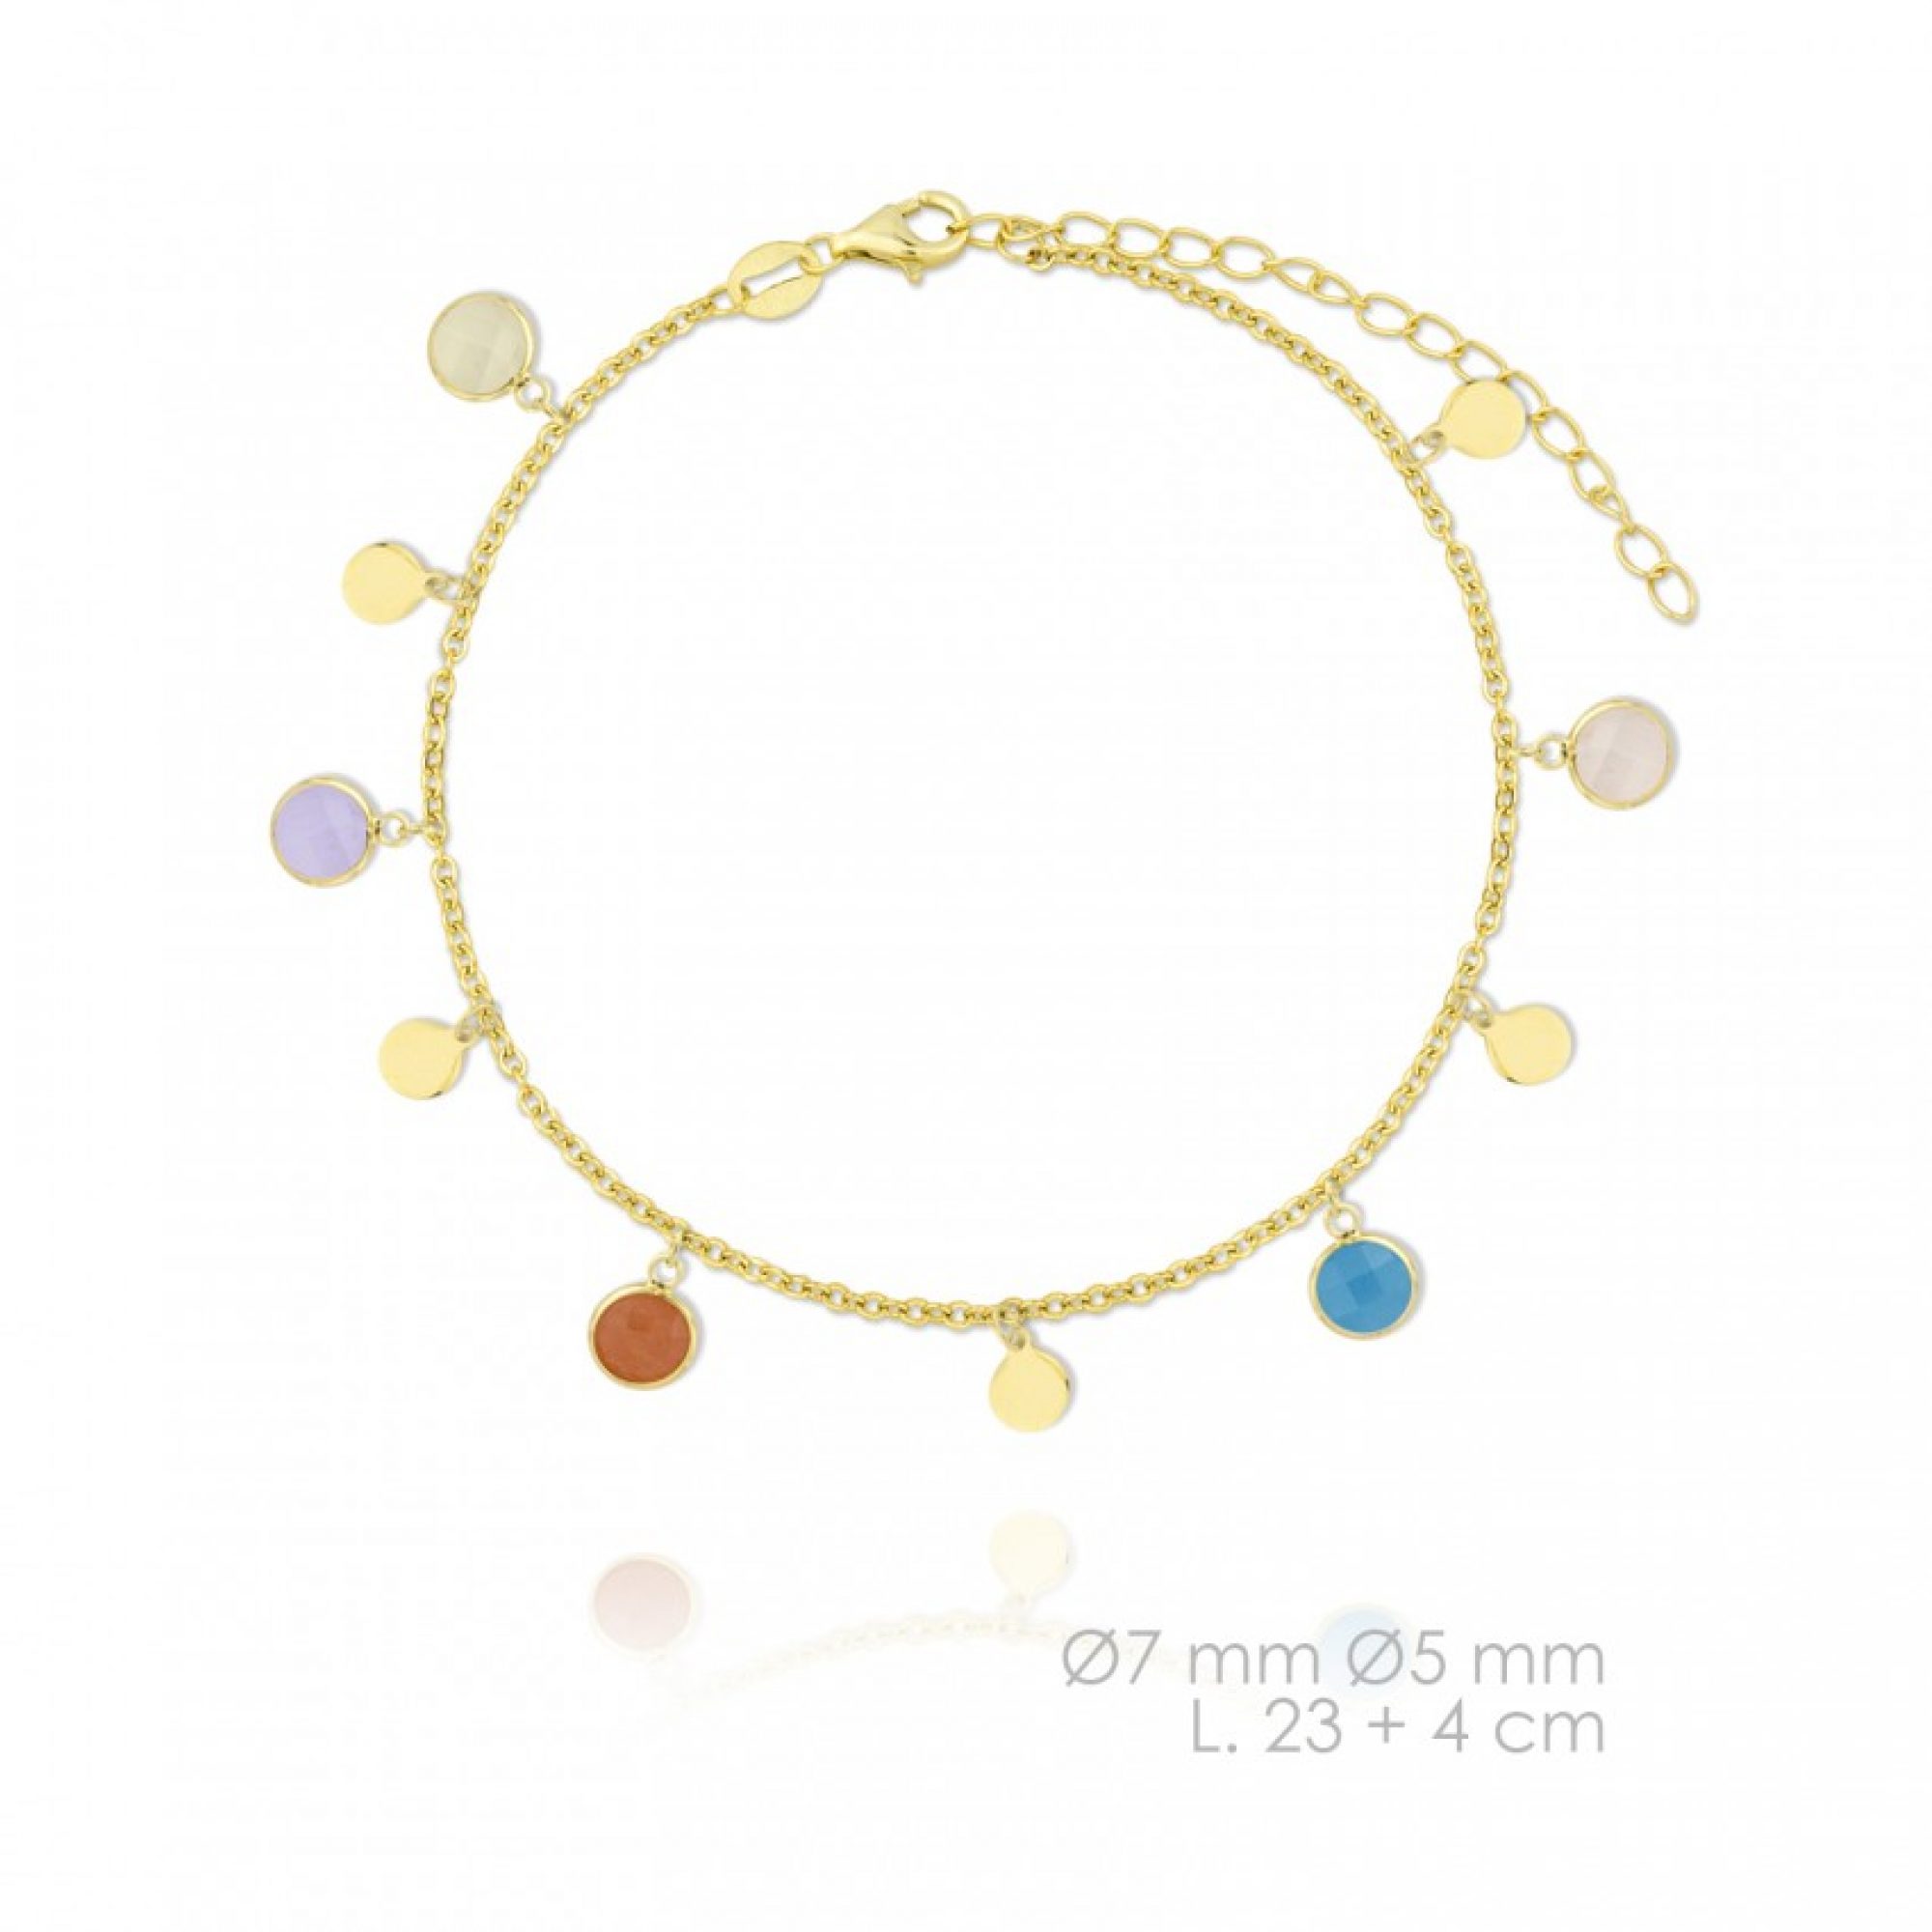 Gold plated anklet with stones and dangles